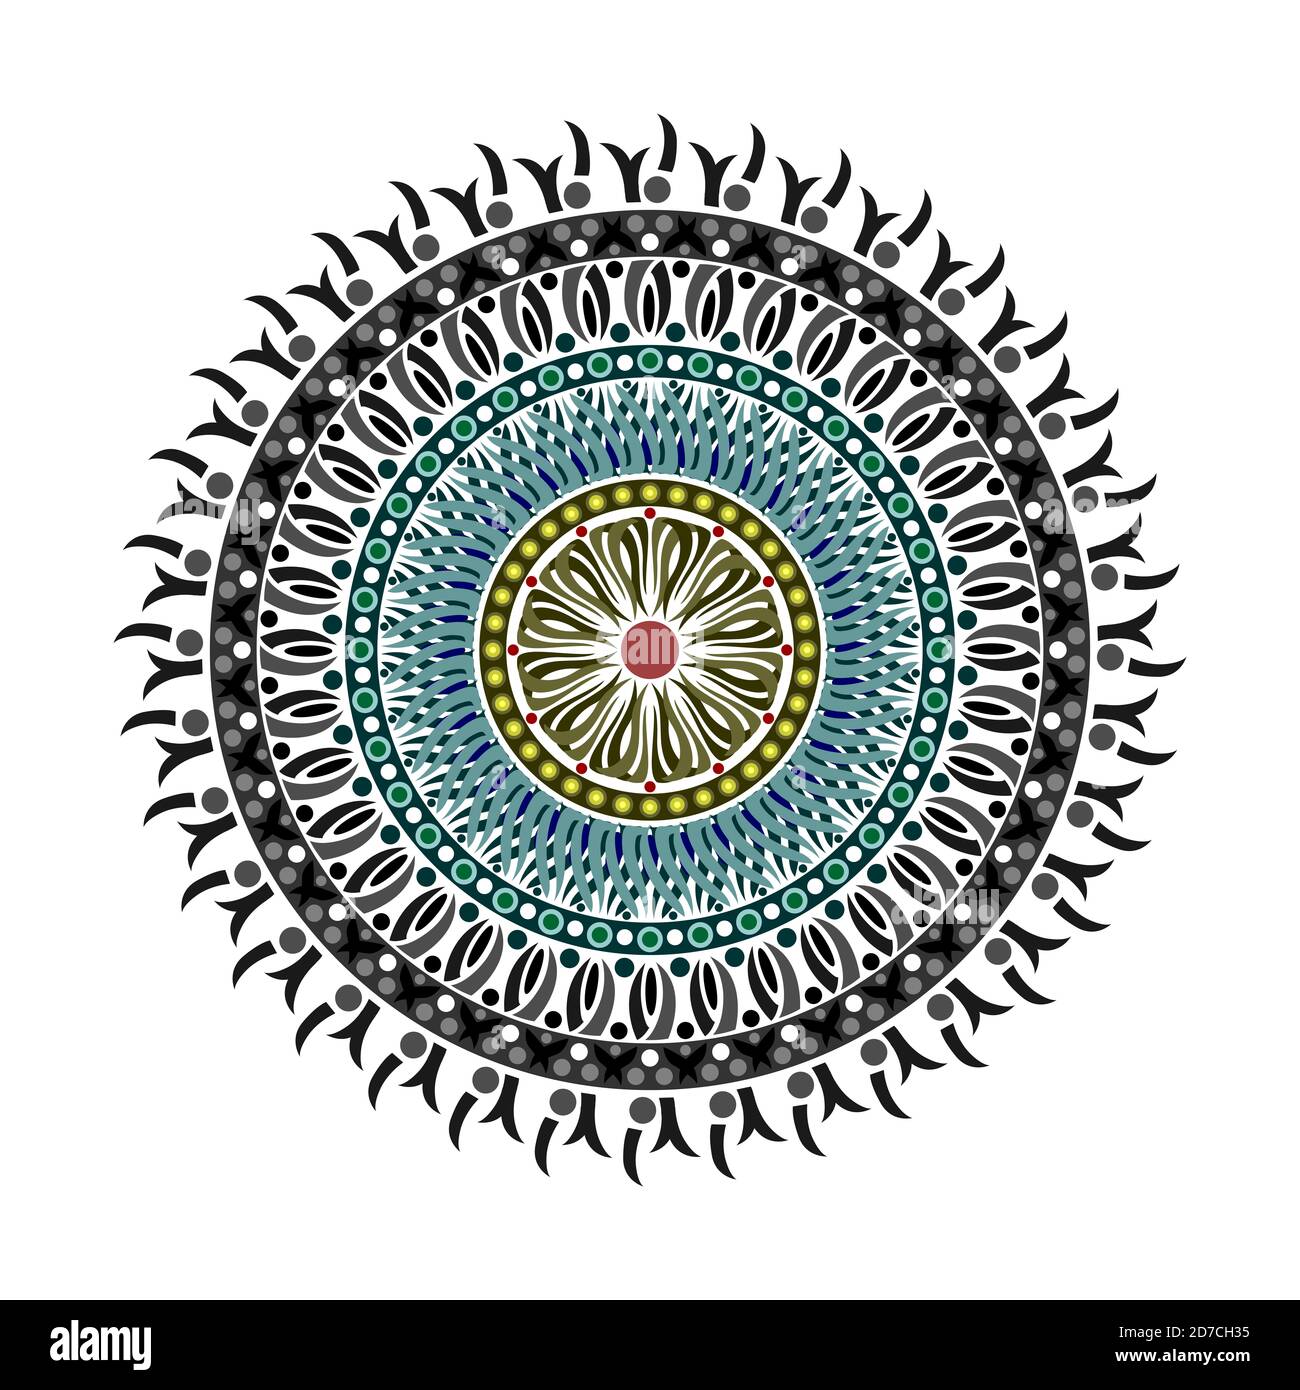 This is a work of mandala art made in as much detail as possible and combined with fariatic colors to create the maximum shape. files in eps format. Stock Photo